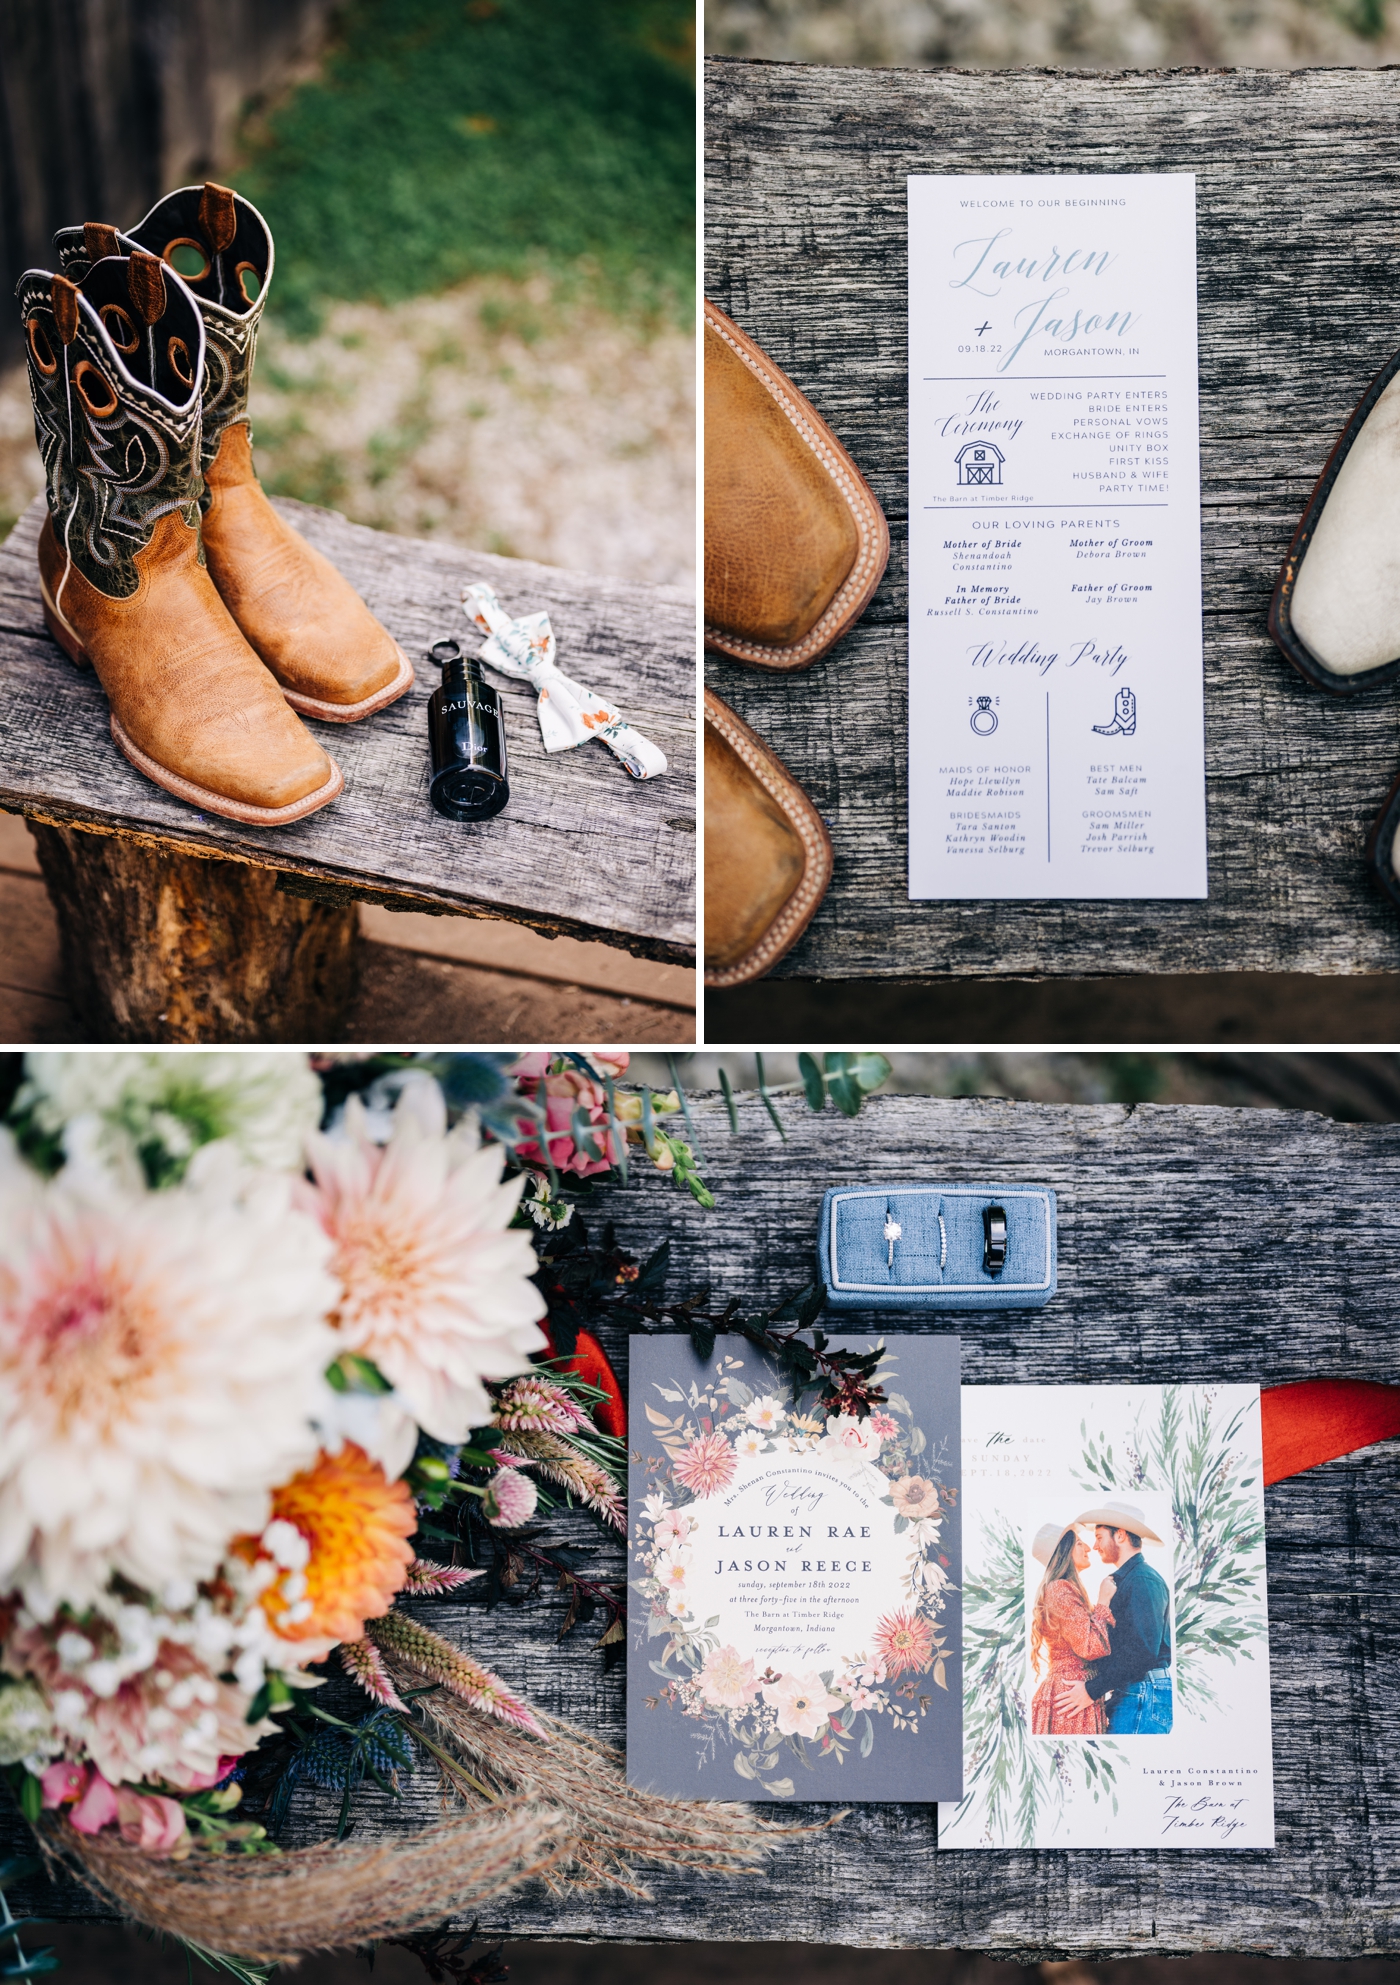 Rustic wedding day invitations and details for wedding in Indiana